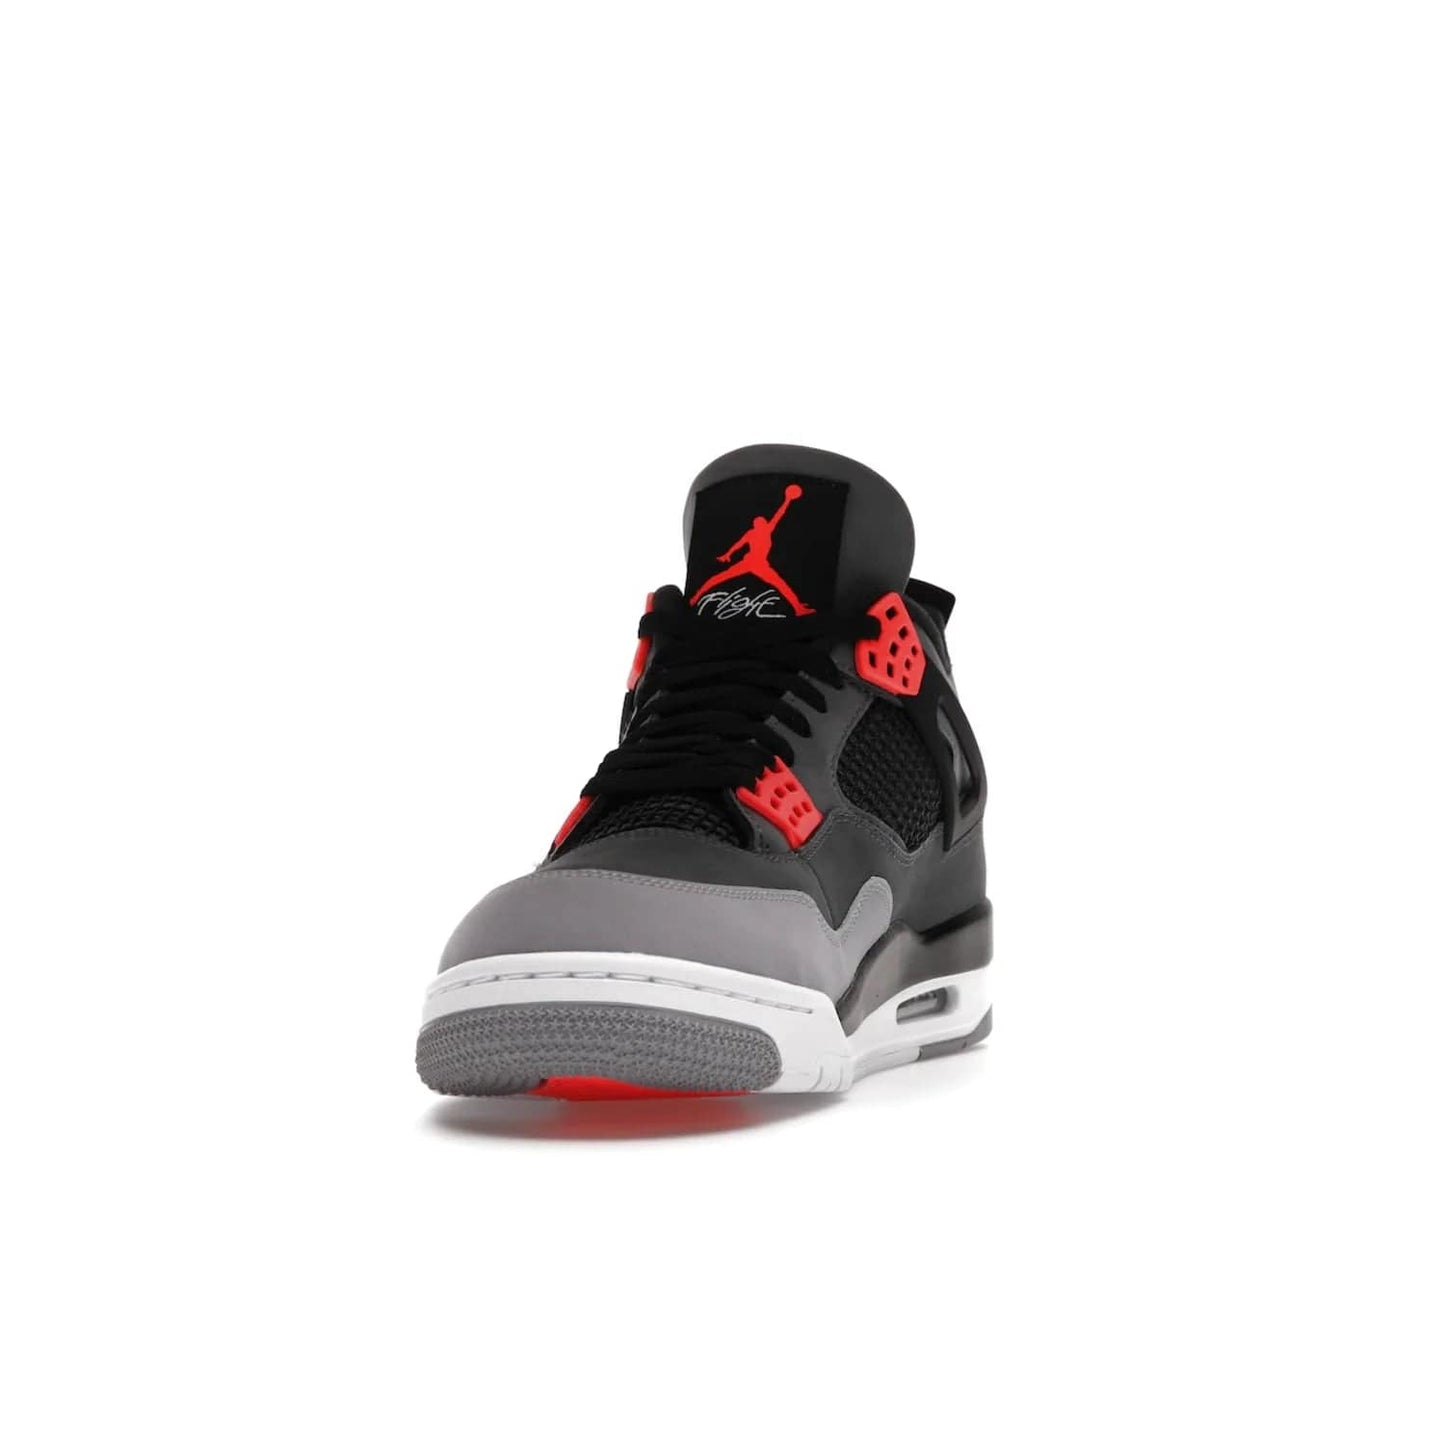 Jordan 4 Retro Infrared - Image 12 - Only at www.BallersClubKickz.com - Introducing the classic & timeless Air Jordan 4 Infrared. Durabuck upper, TPU mesh inserts, tech straps & heel tabs in dark grey and infrared accents. White sole with visible Air units. Out June 15, 2022. Get your pair now!